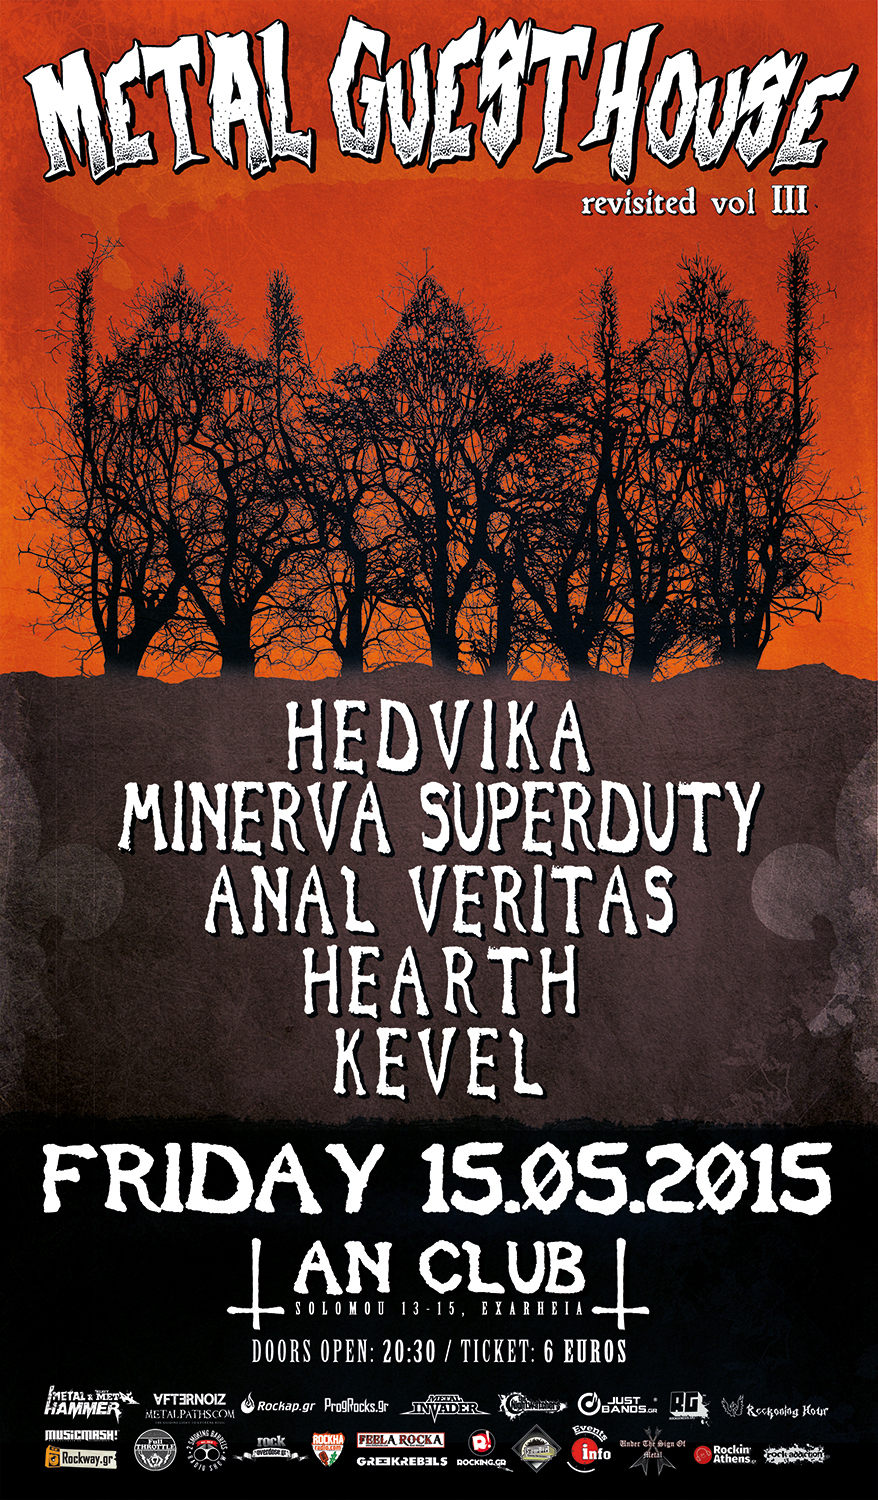 15.05.2015 – METAL GUESTHOUSE (revisited) vol 3